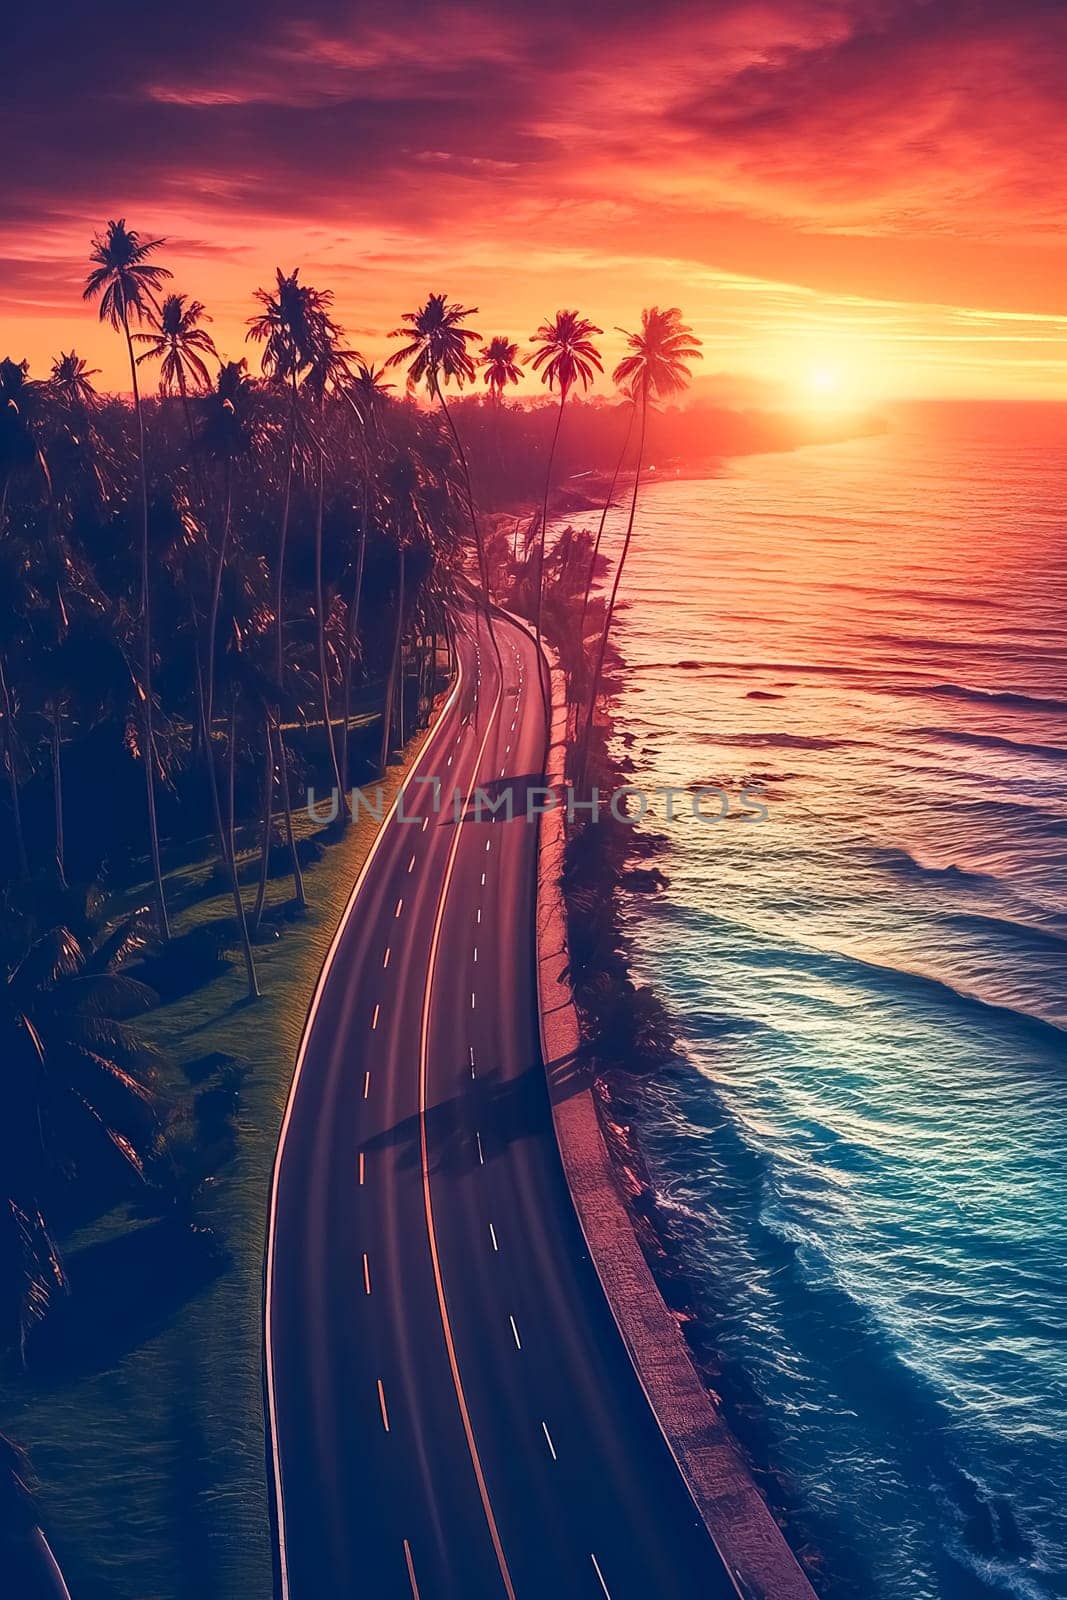 An illustration capturing the scenic view of a road winding between mountains and a tranquil sea beach at sunset. A picturesque coastal landscape scene.